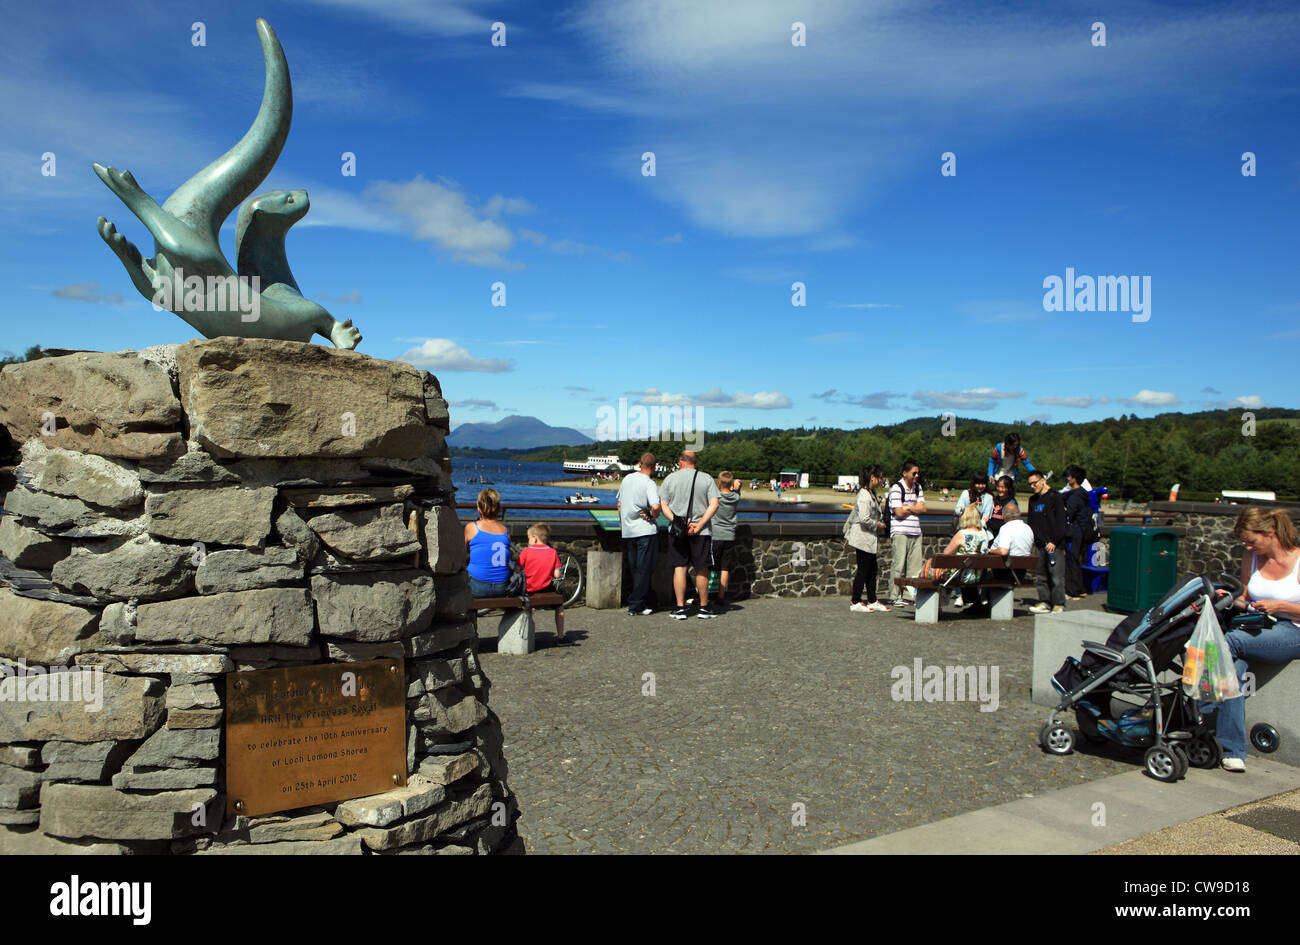 Visitors and families near the Otter sculpture outside the Loch Lomond sealife Centre at Loch Lomond Shores in Scotland Stock Photo